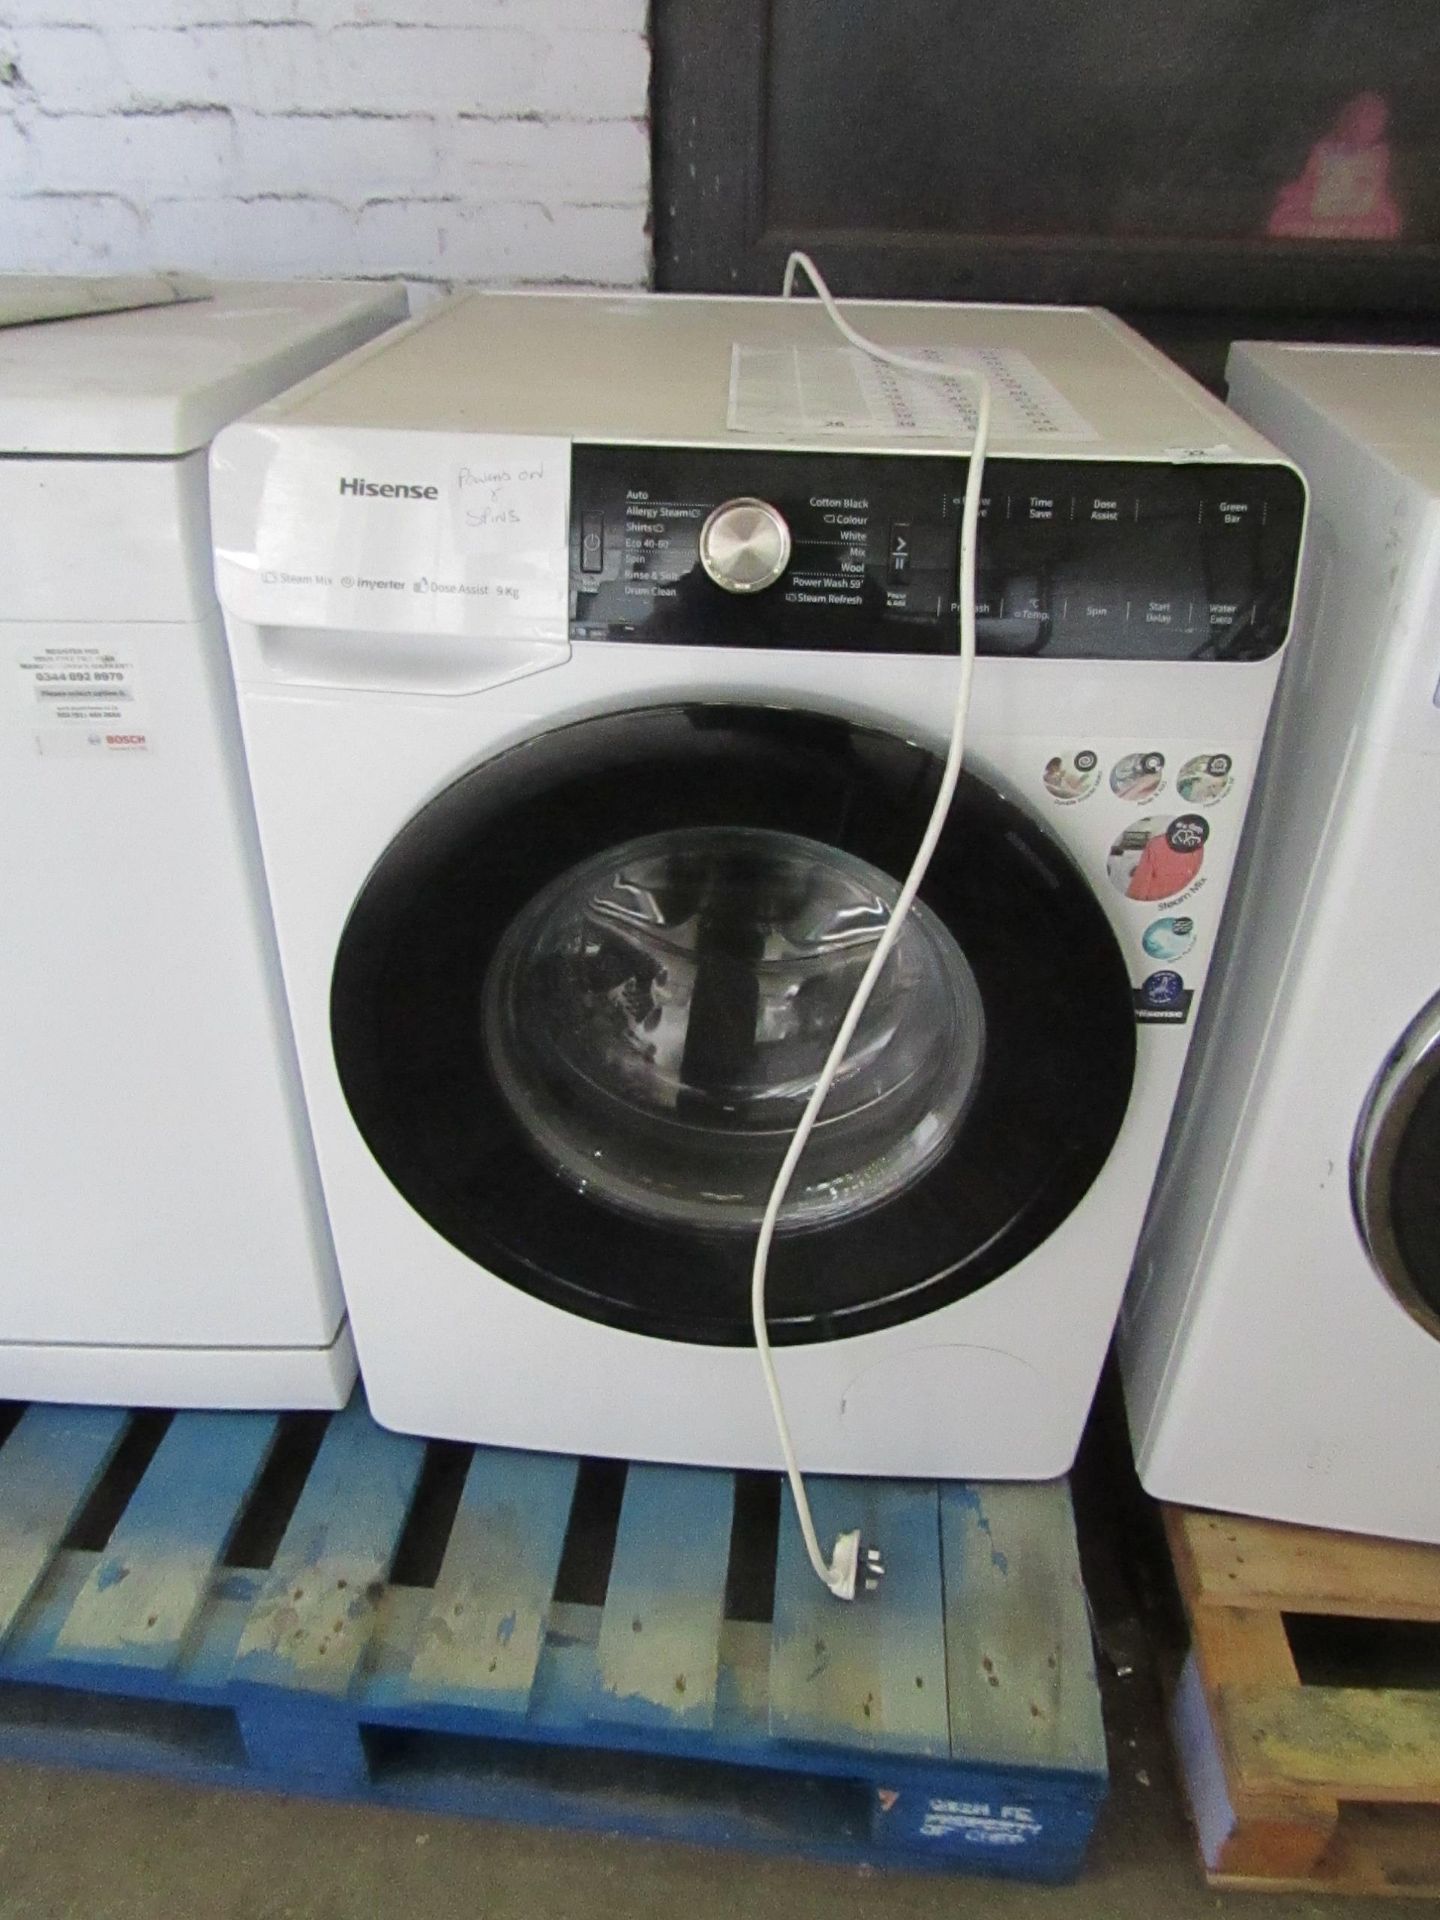 Hisense 9KG washing Machine with dose assist, Powers on and spins but we have not conencted it to